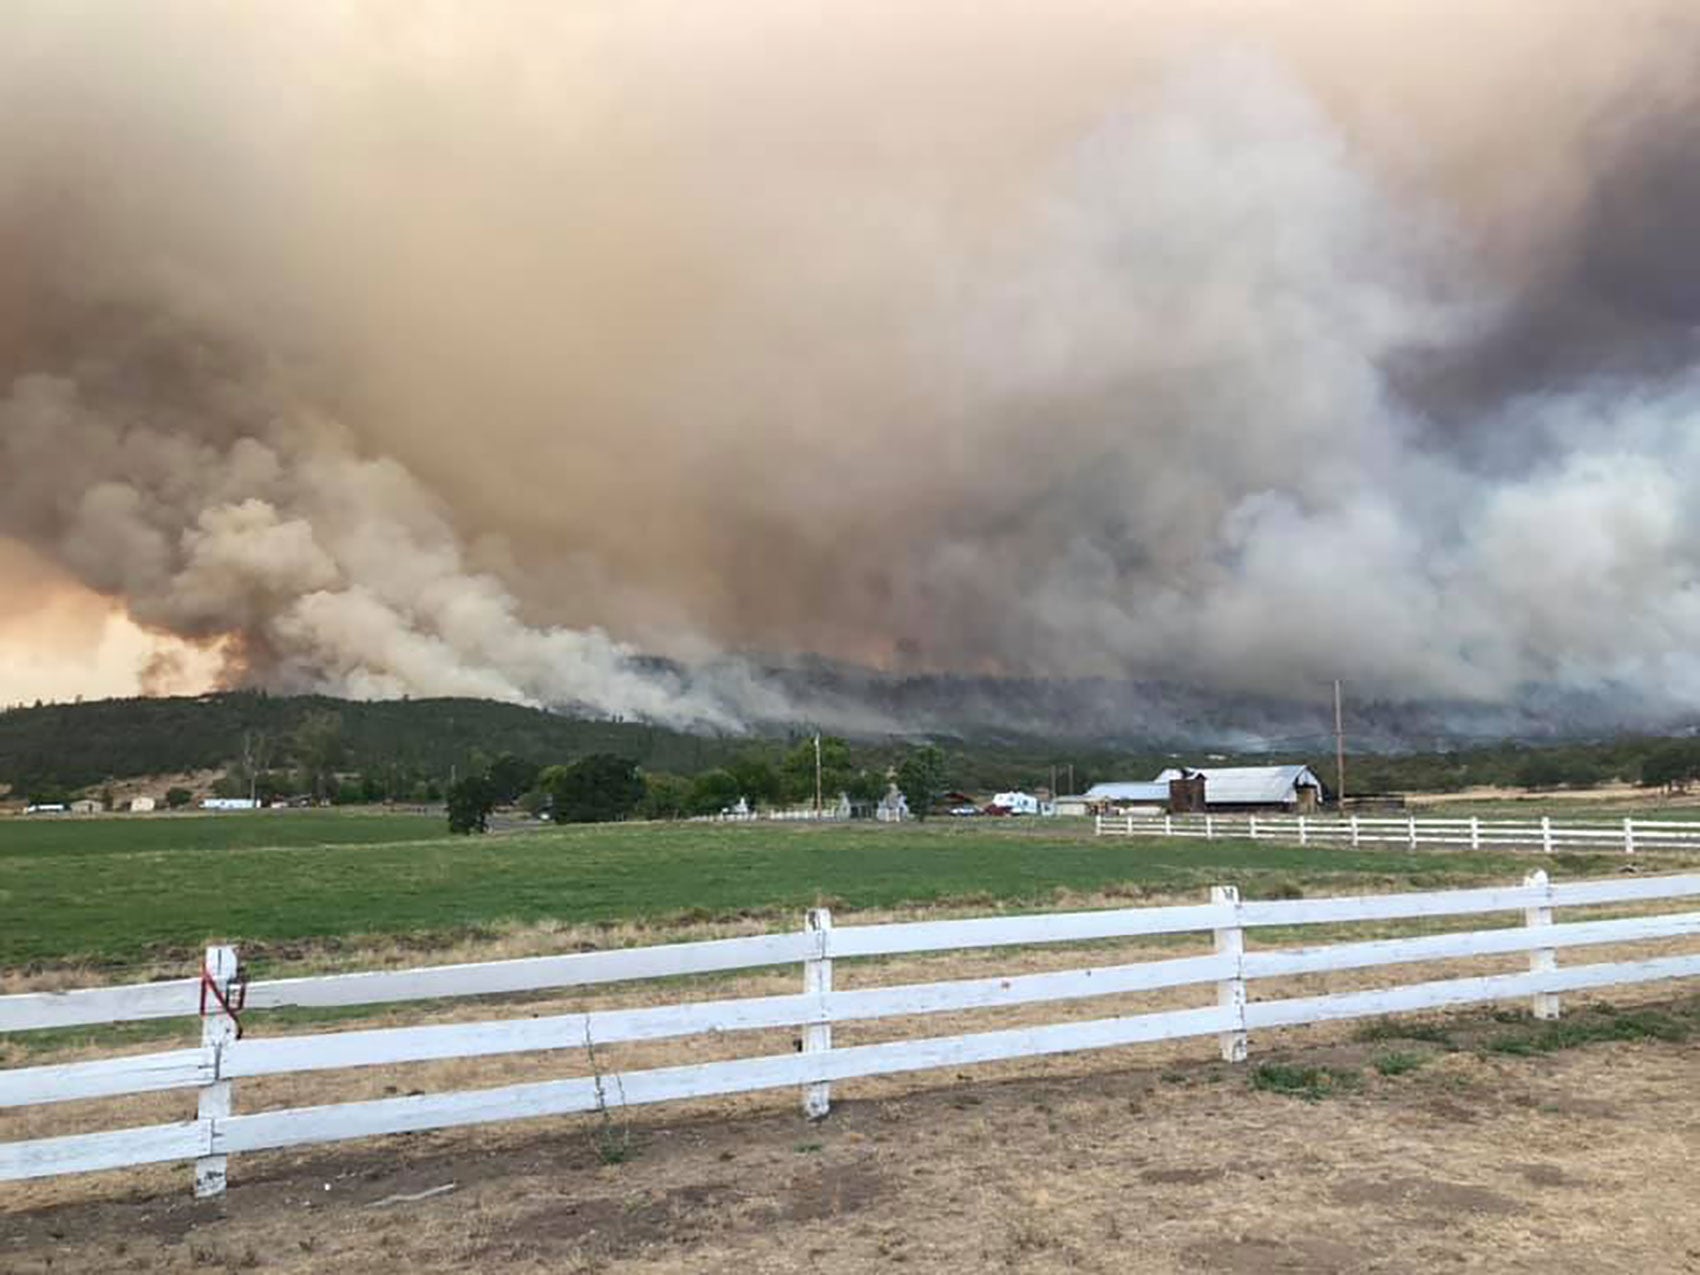 Oregon faces unprecedented wildfires and evacuations AGDAILY